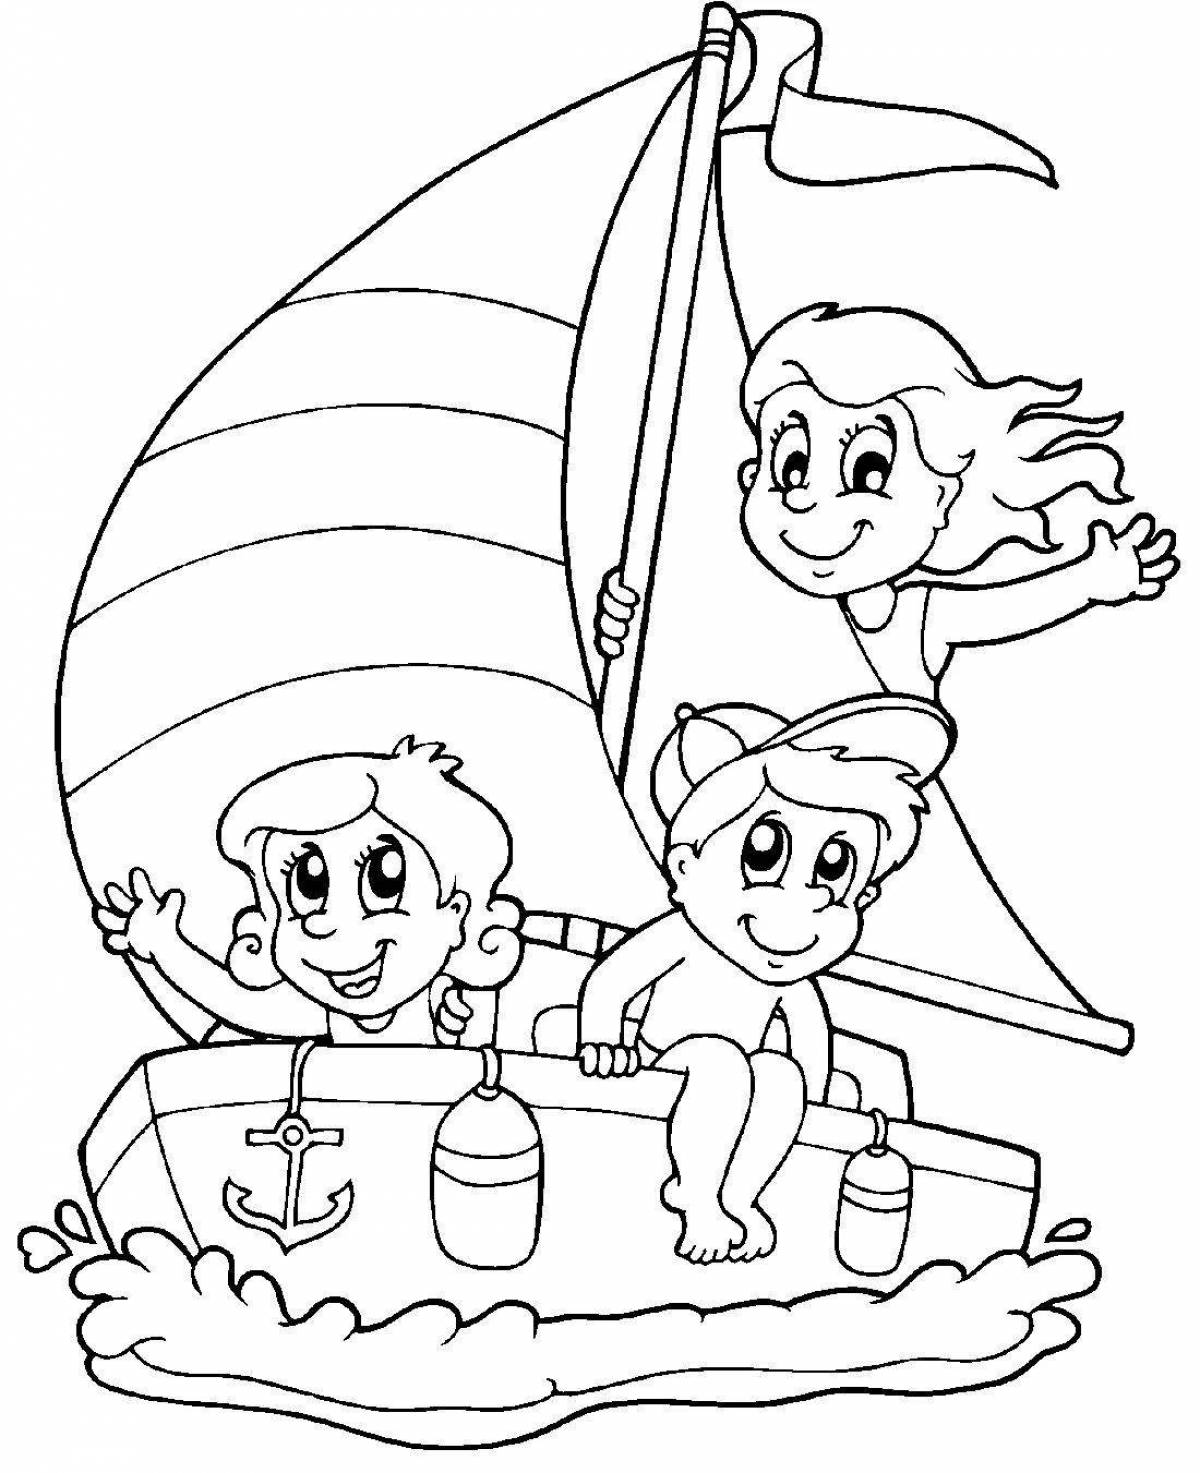 Glowing hut coloring book for kids